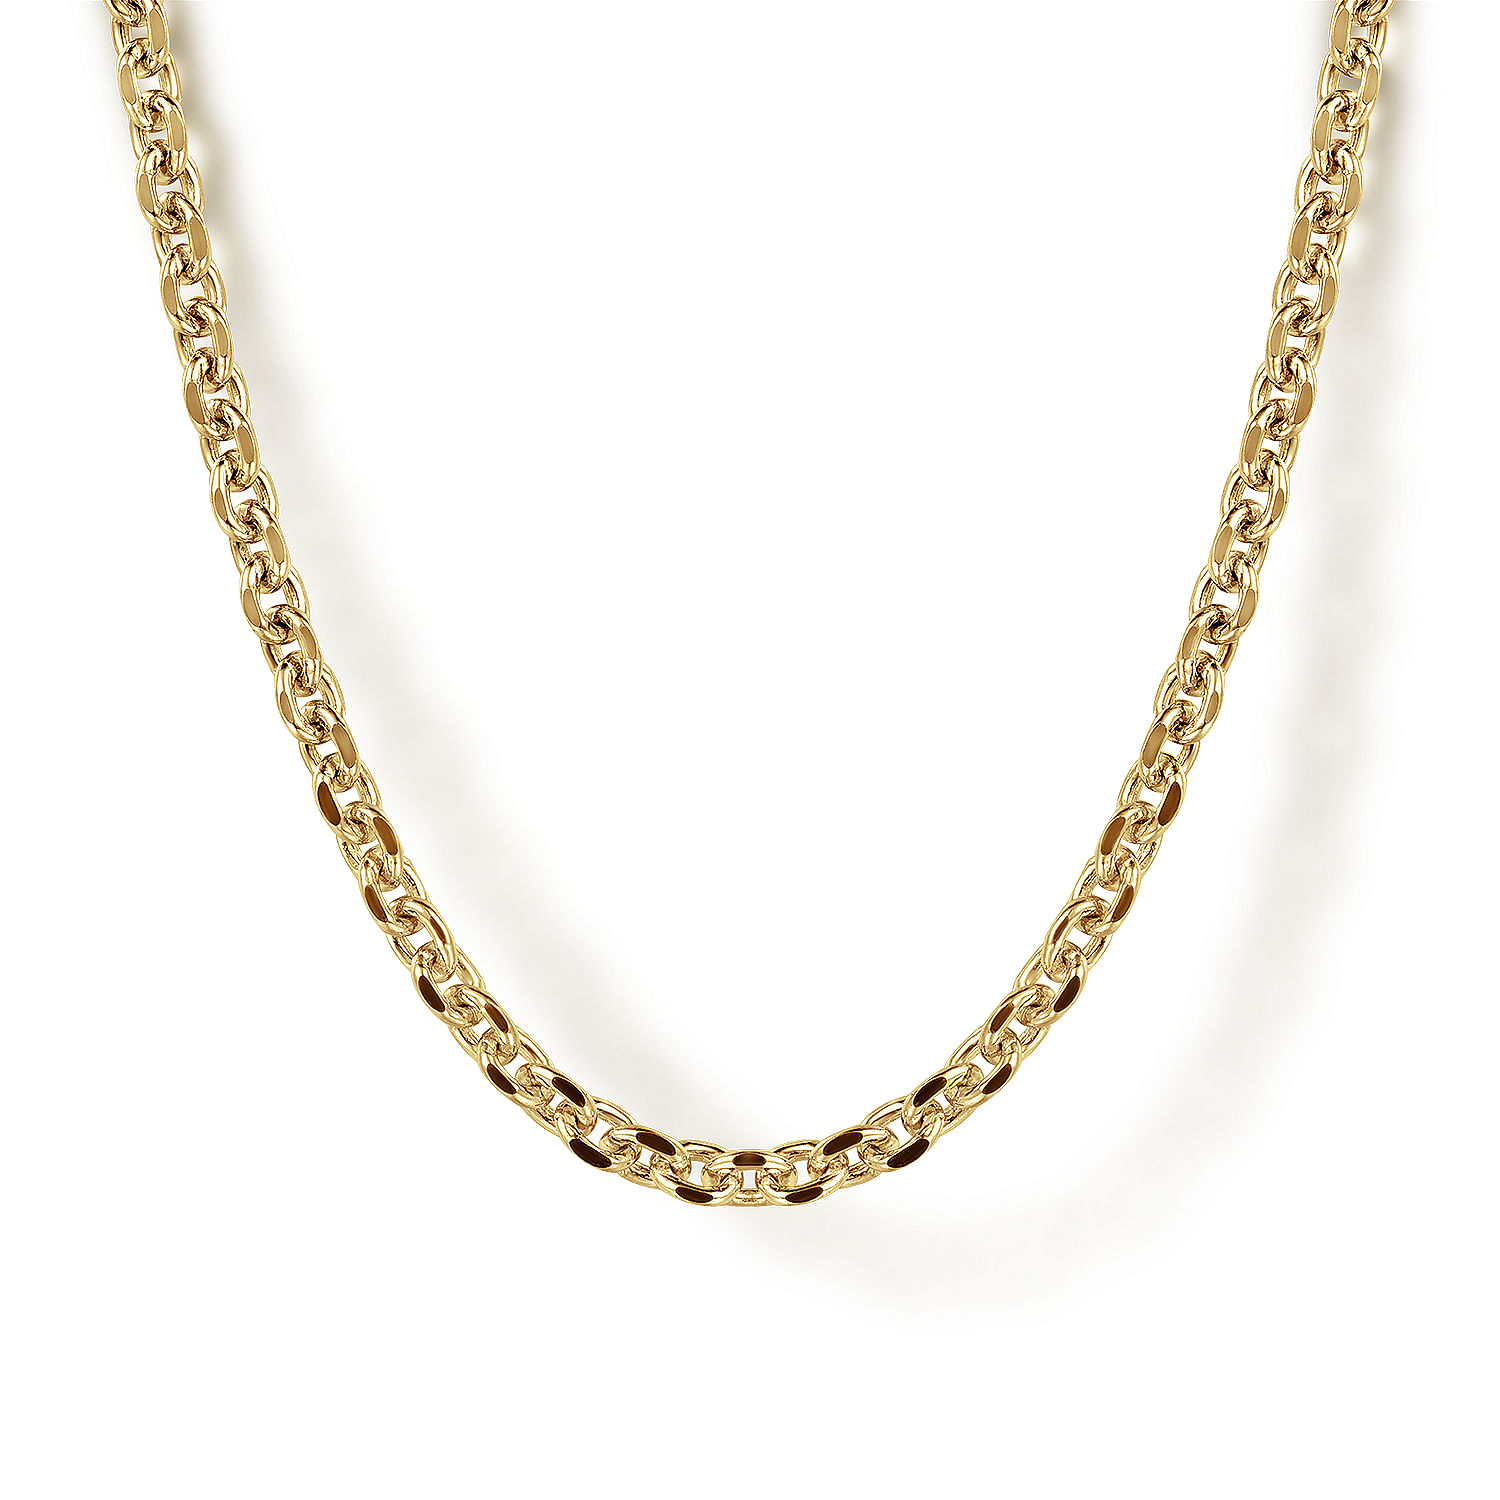 22-Inch-14K-Yellow-Gold-Hollow-Men's-Link-Chain-Necklace1